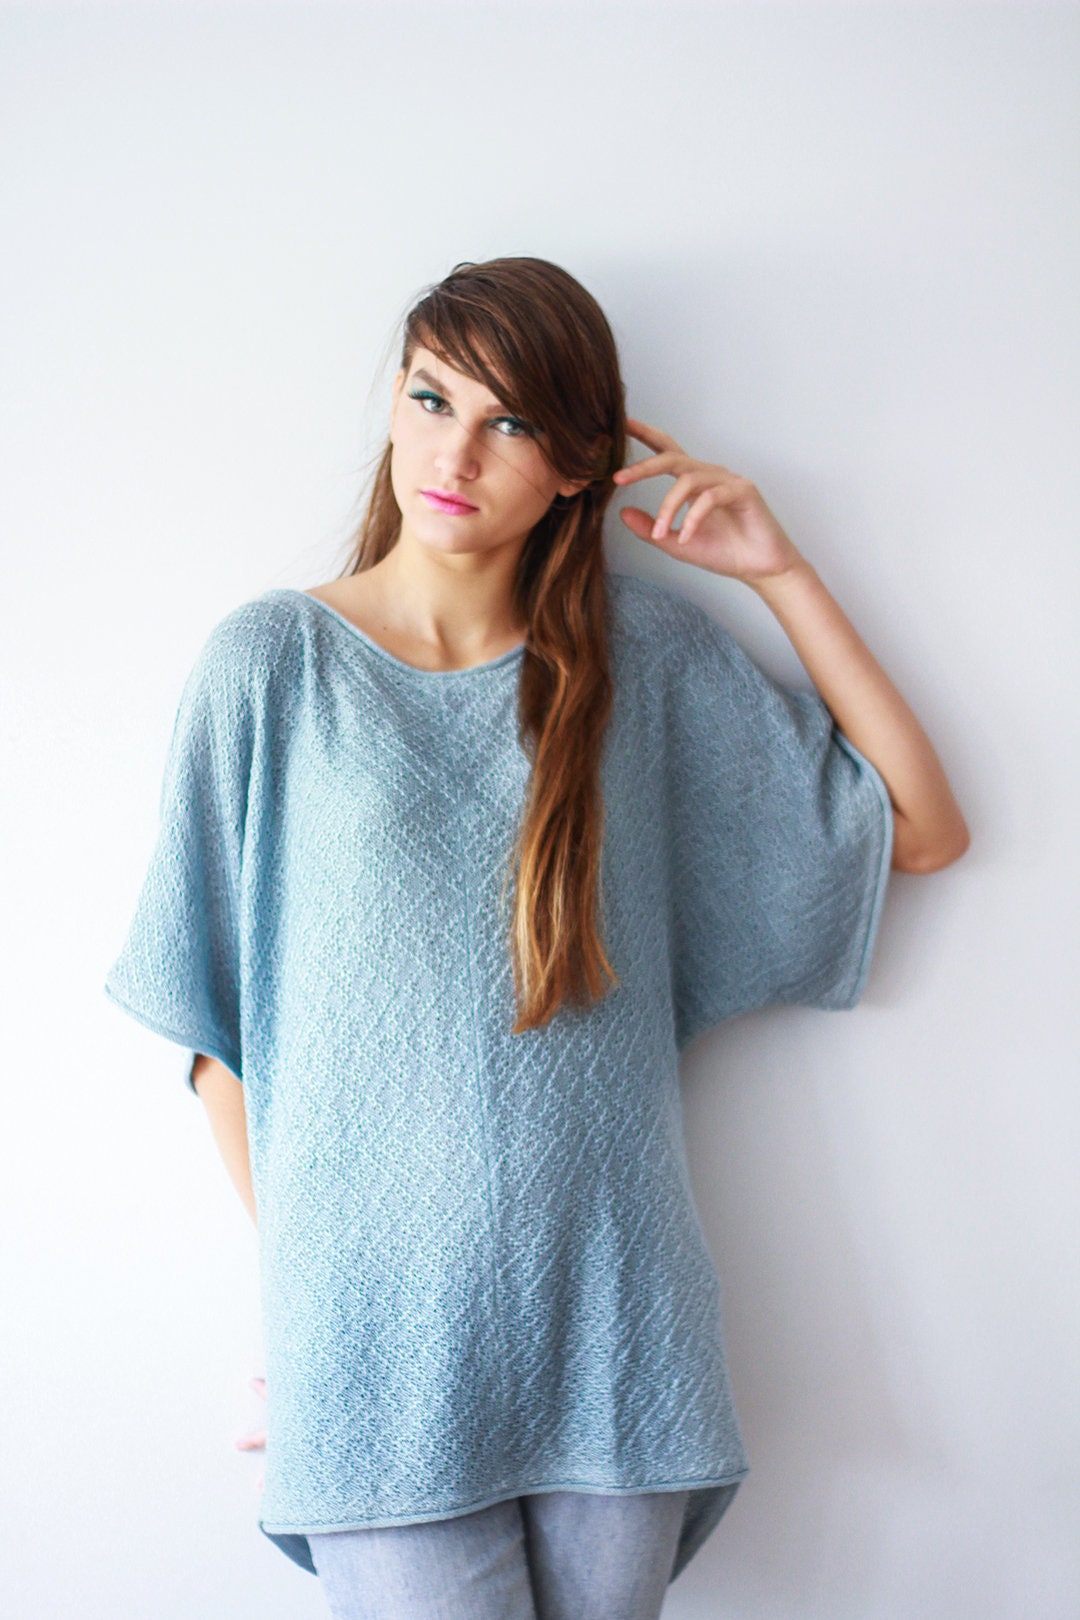 Blue Knit Top Shoulder off Sweater Slouchy Sweater V Neck - Etsy